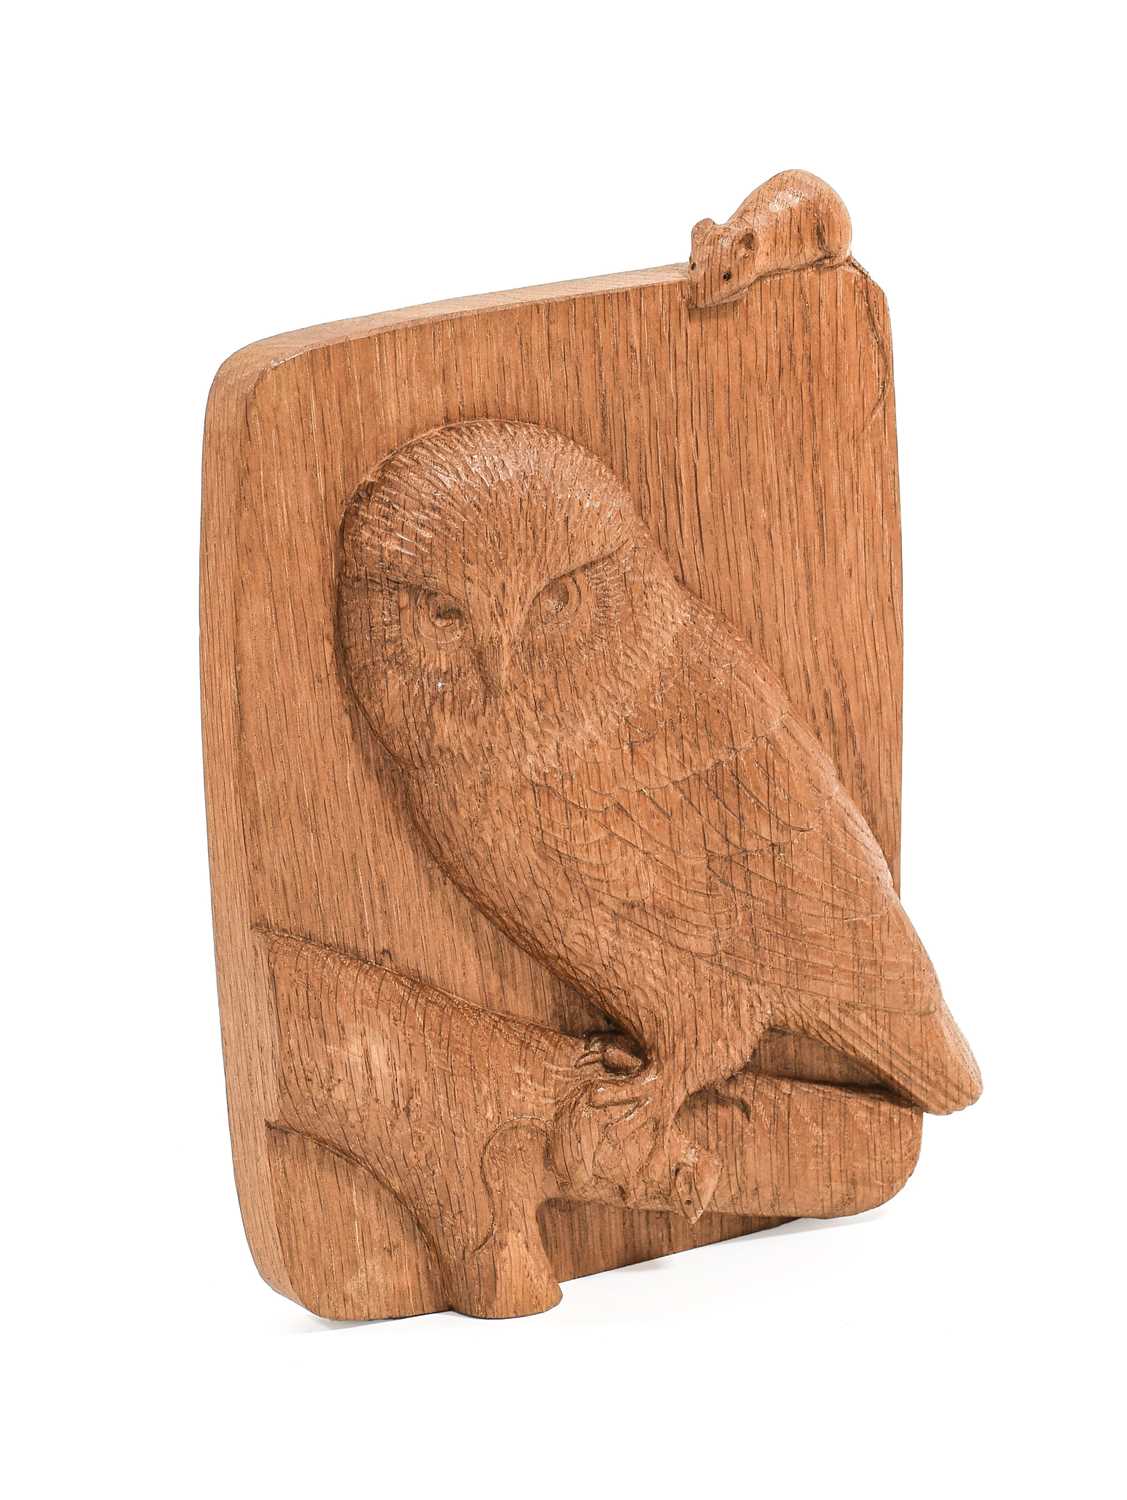 Workshop of Robert Mouseman Thompson (Kilburn): An English Oak Owl Plaque, with an owl perched on